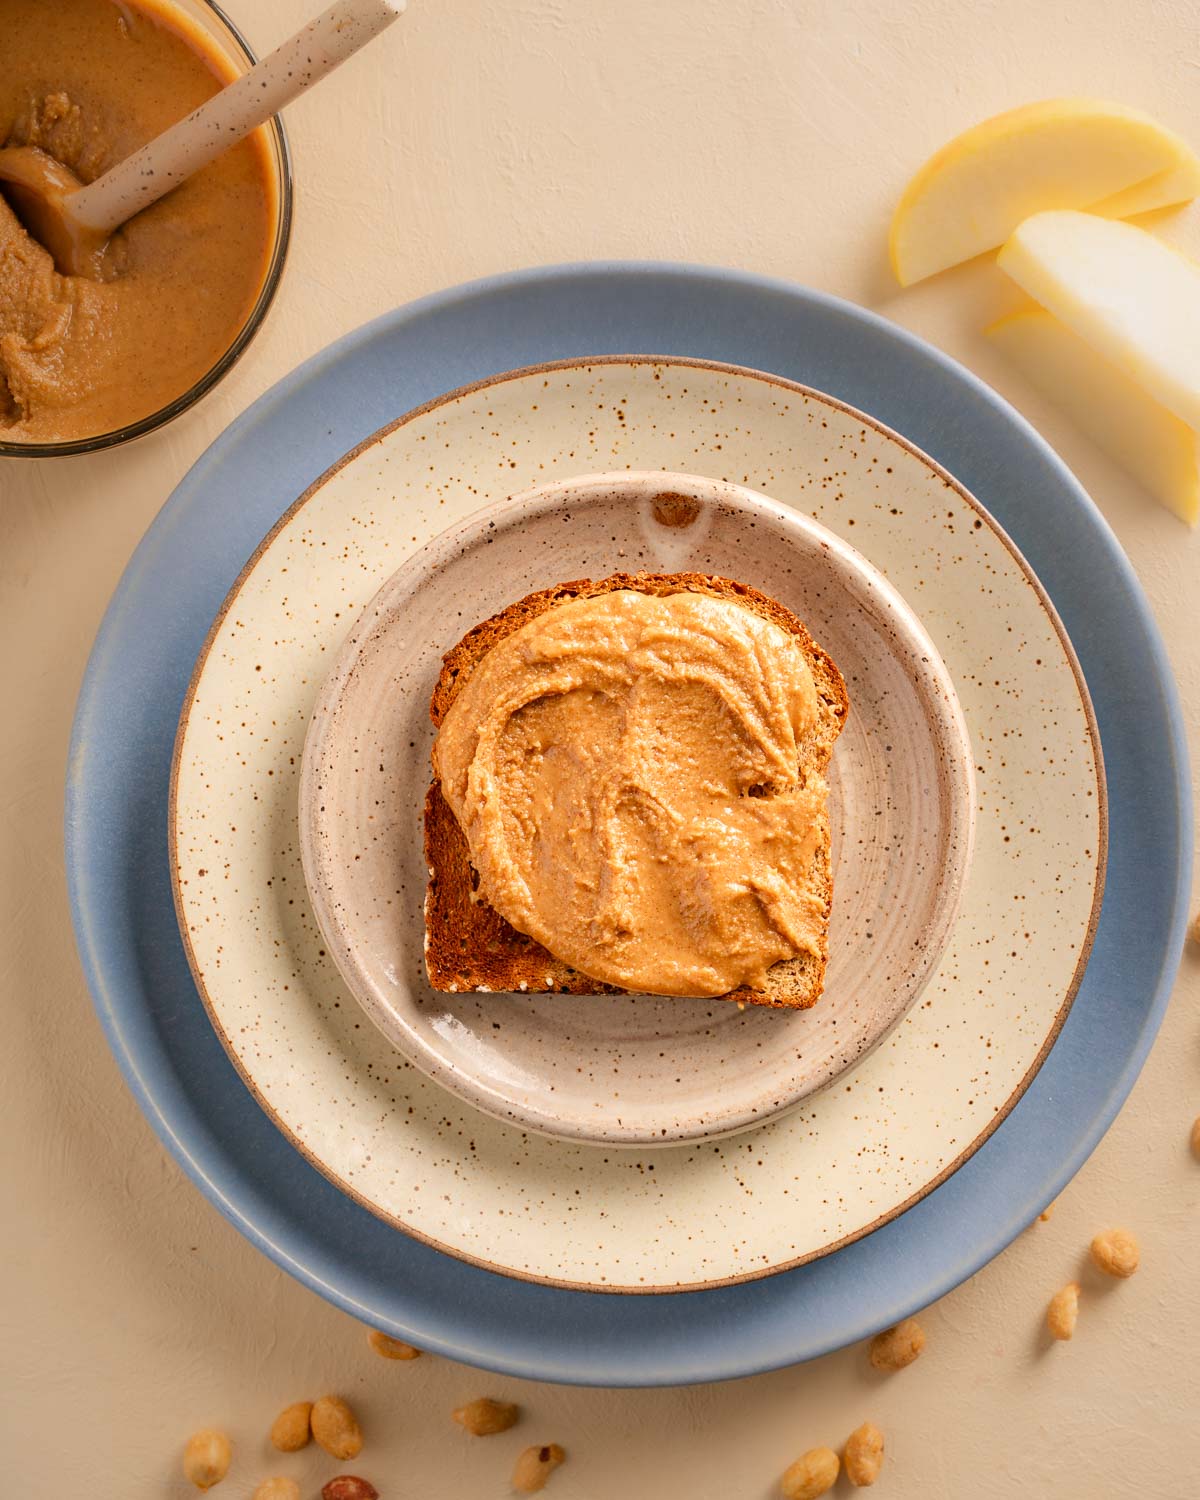 A slice of bread lathered with Vanilla Cinnamon Peanut Butter sitting on top of three stacked plates of different sizes. Food props include the bowl of nut butter with a ceramic spoon, sliced apples and peanuts. 